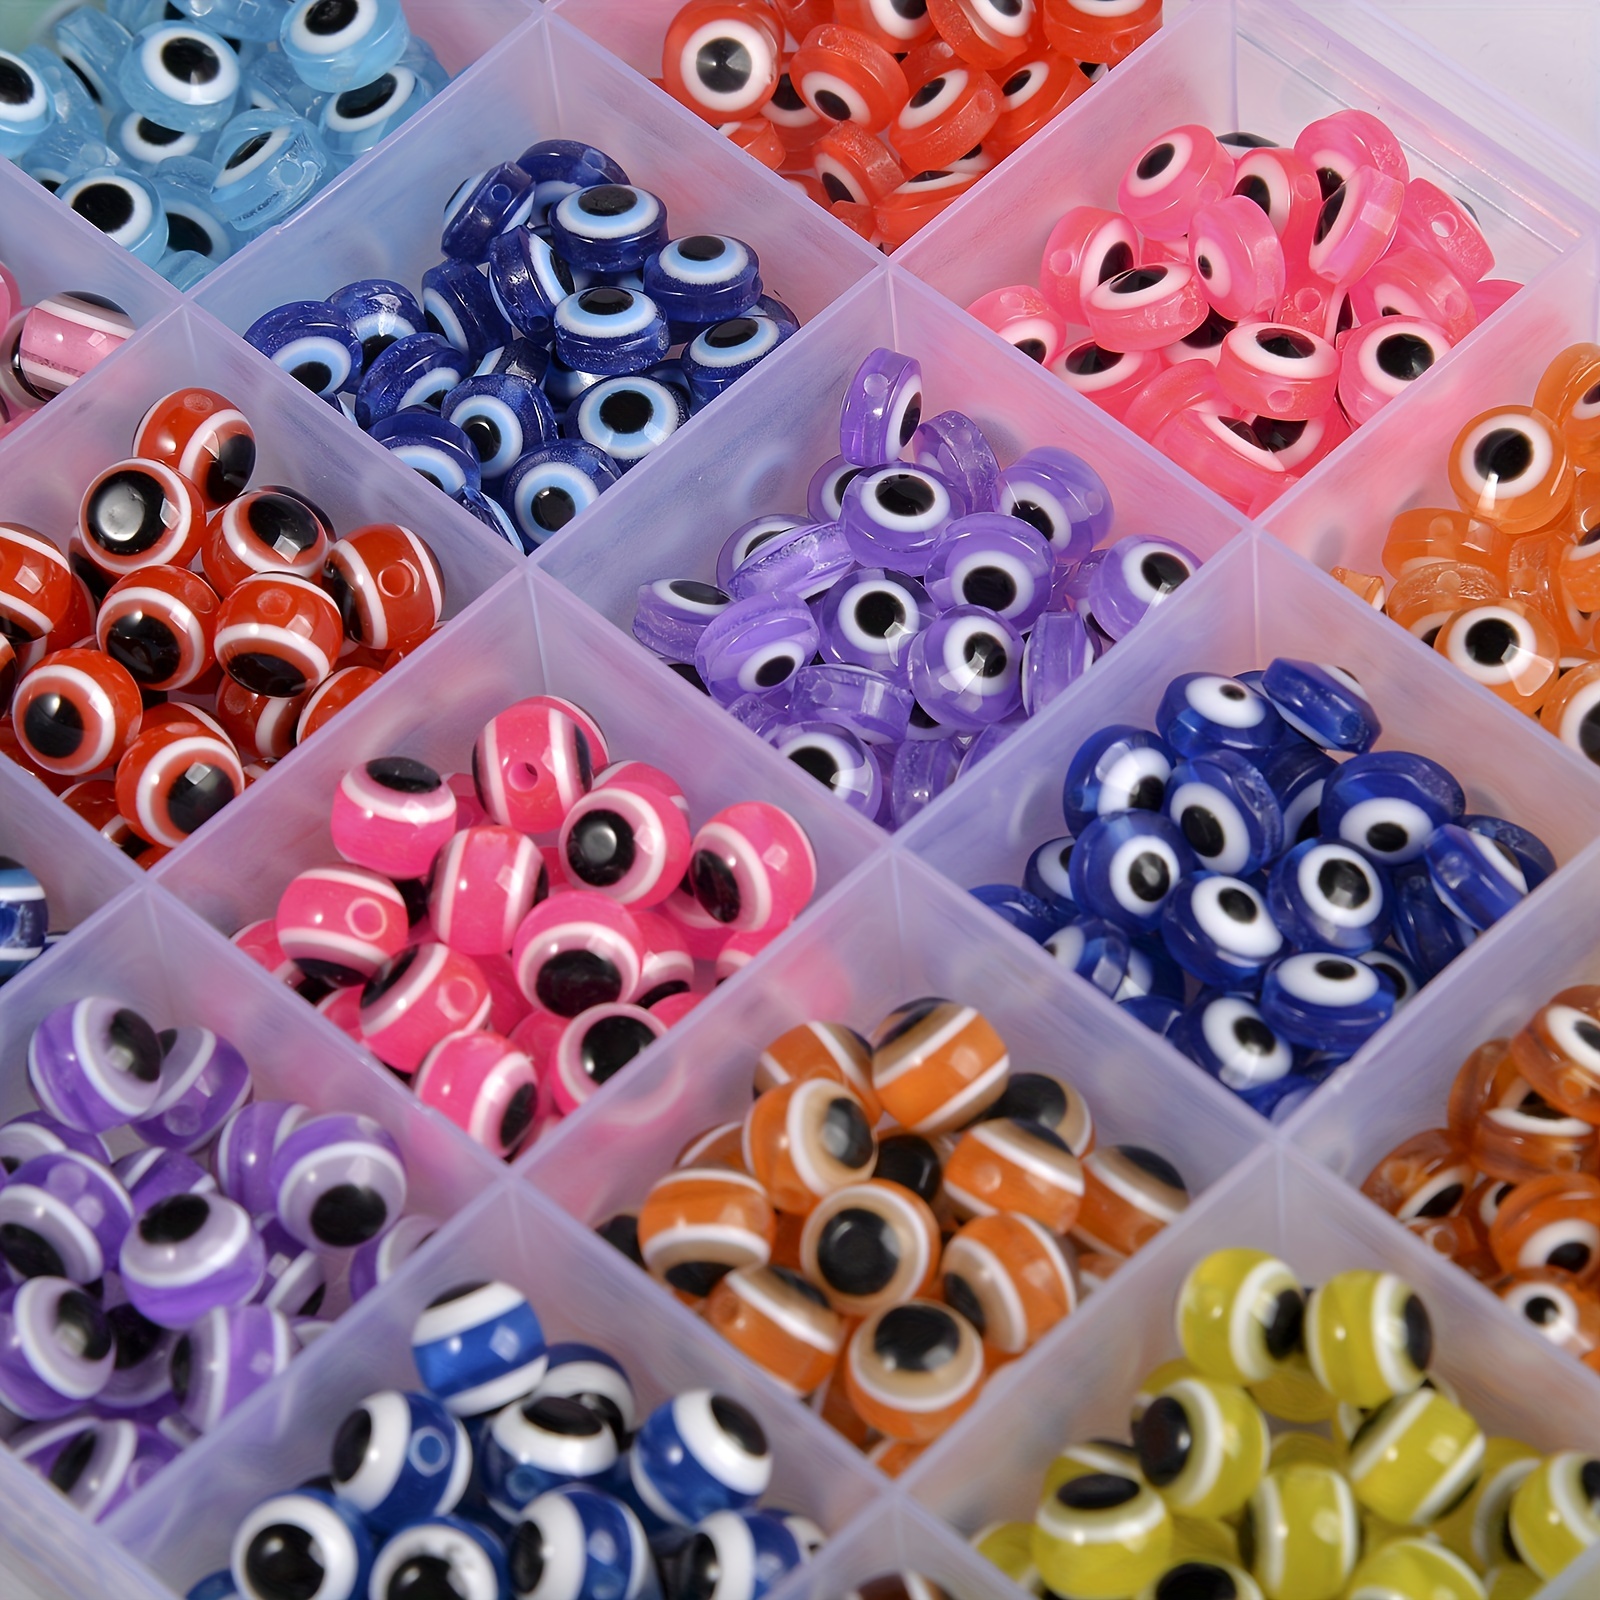 Lot of Assorted Beads for Jewelry Making Evil Eye Plastic Glass Charms Seed  Bead 